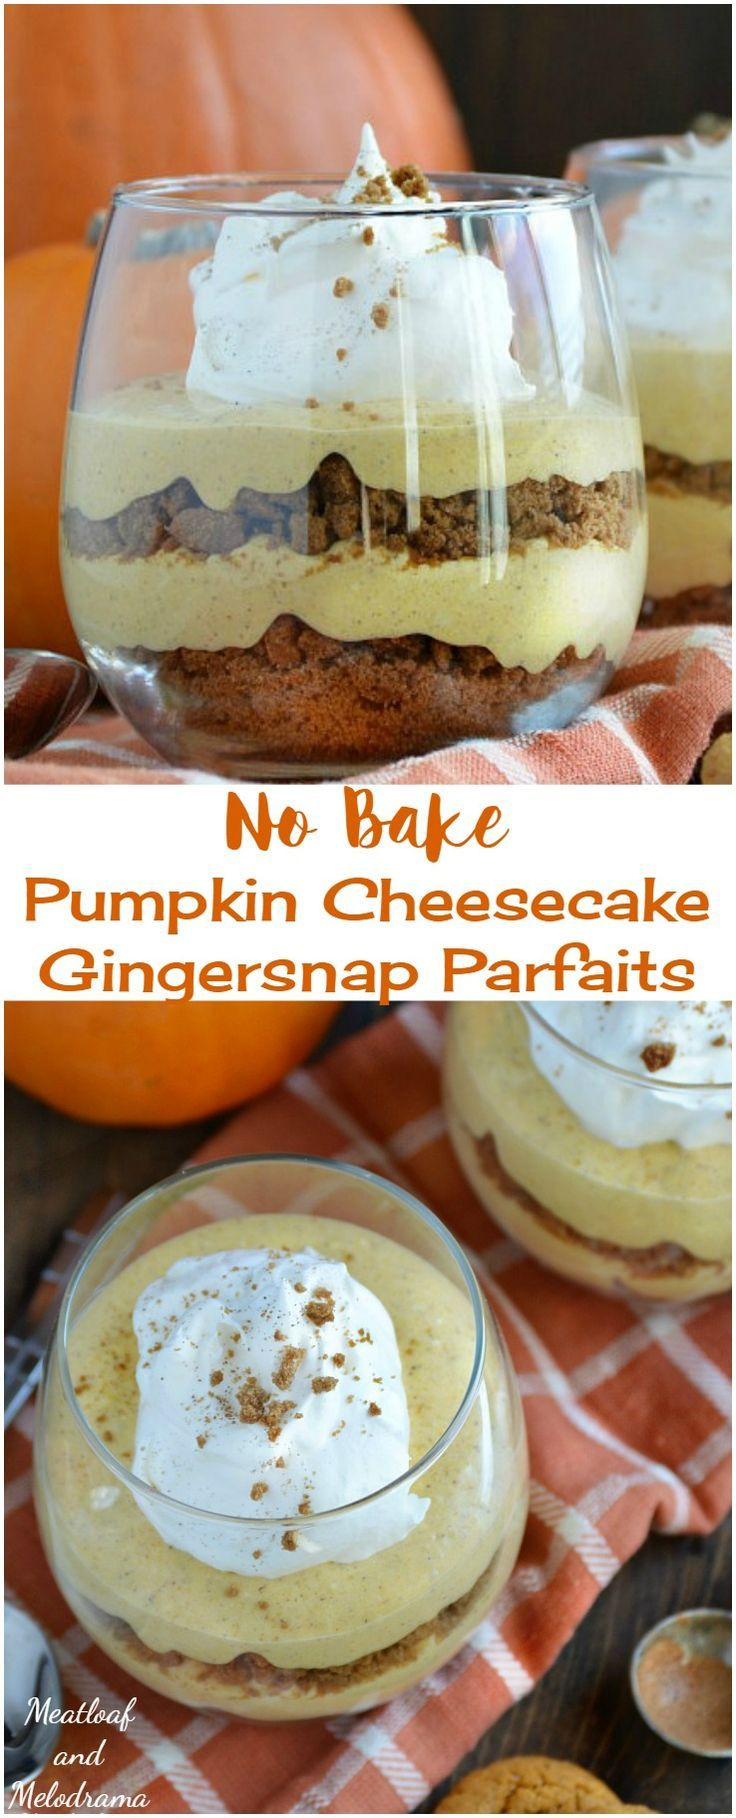 Quick And Easy Fall Desserts
 No Bake Pumpkin Cheesecake Gingersnap Parfaits a quick